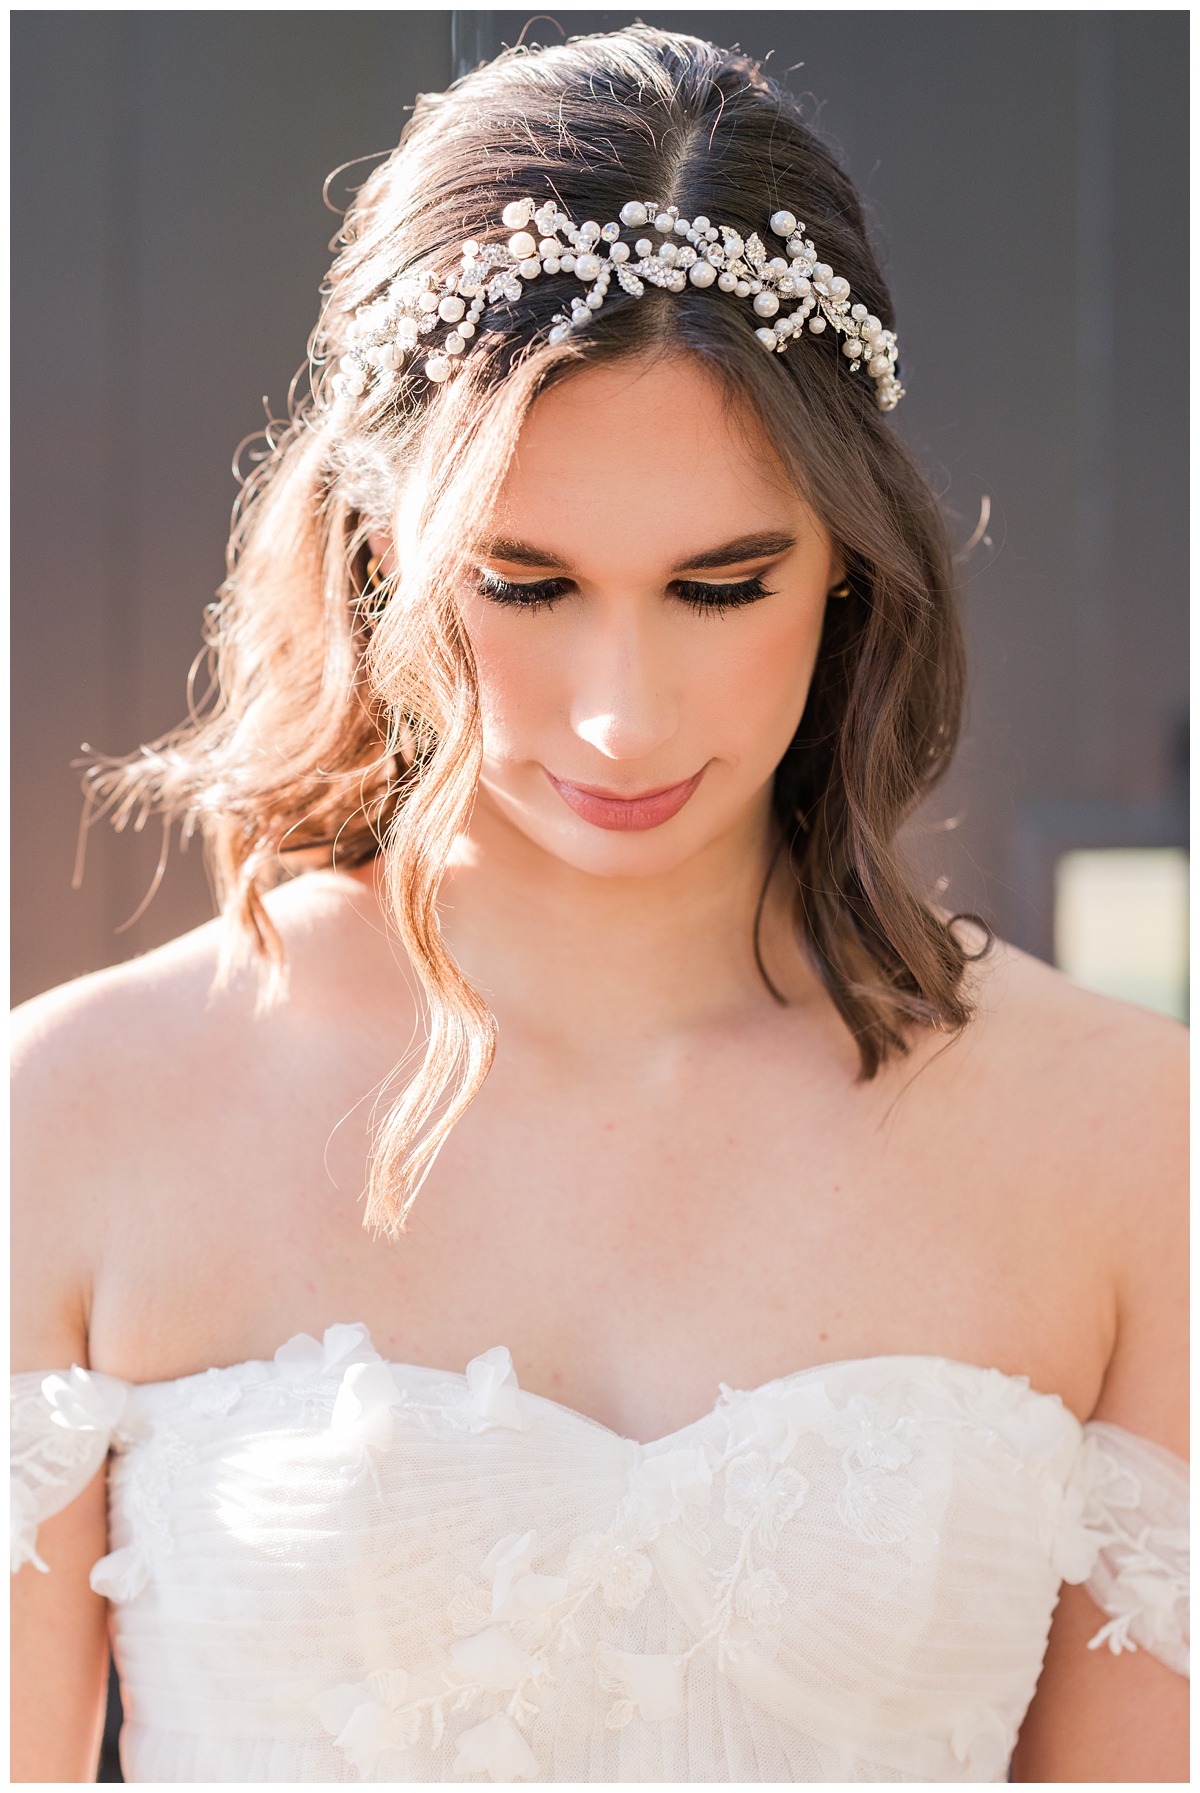 LUX Bridal Hair and make-up for Dripping Springs